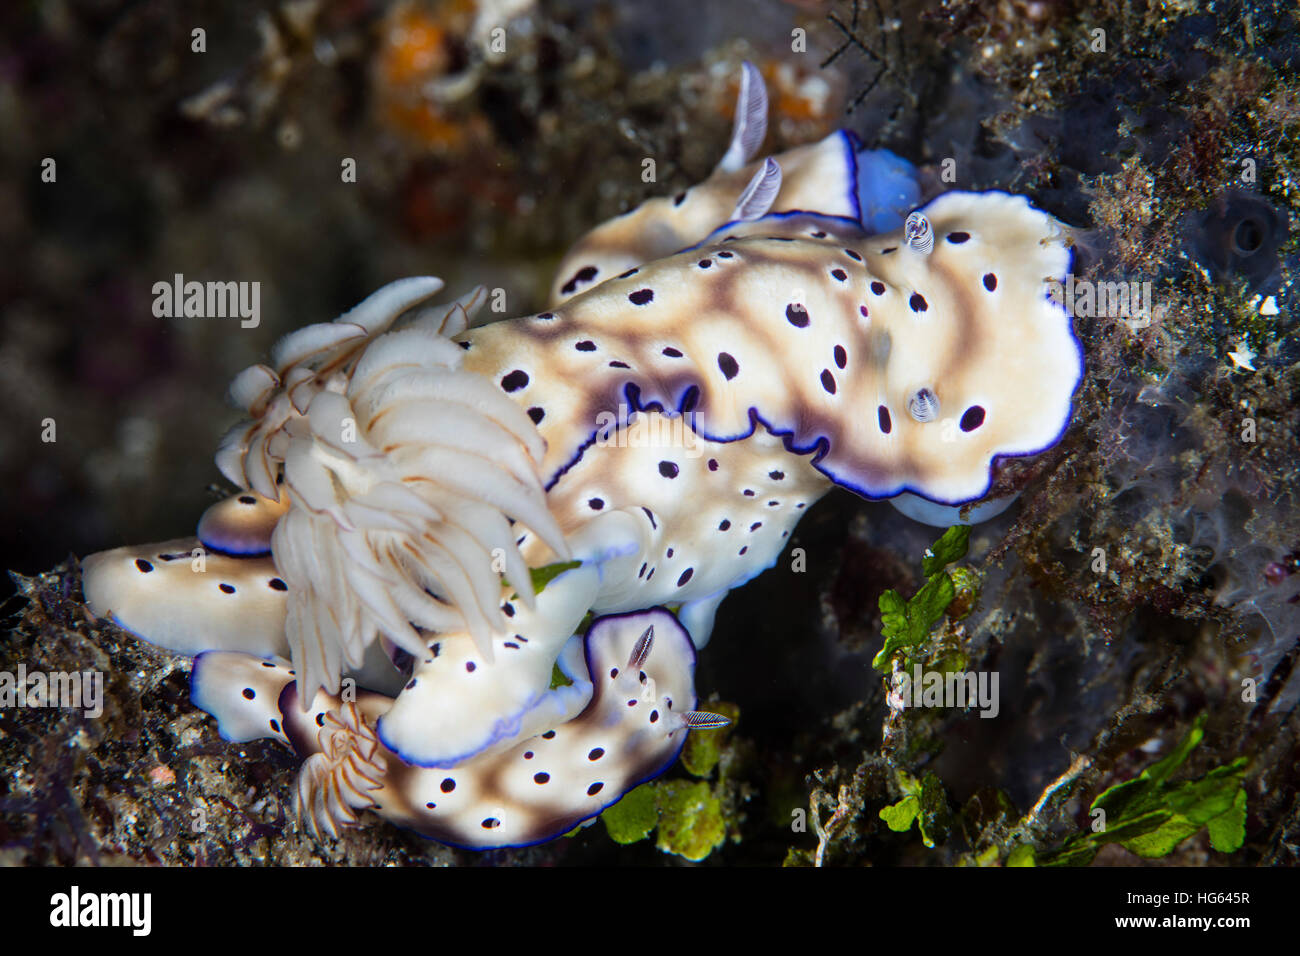 Several Risbecia tryoni nudibranch crawl on one another, Raja Ampat, Indonesia. Stock Photo